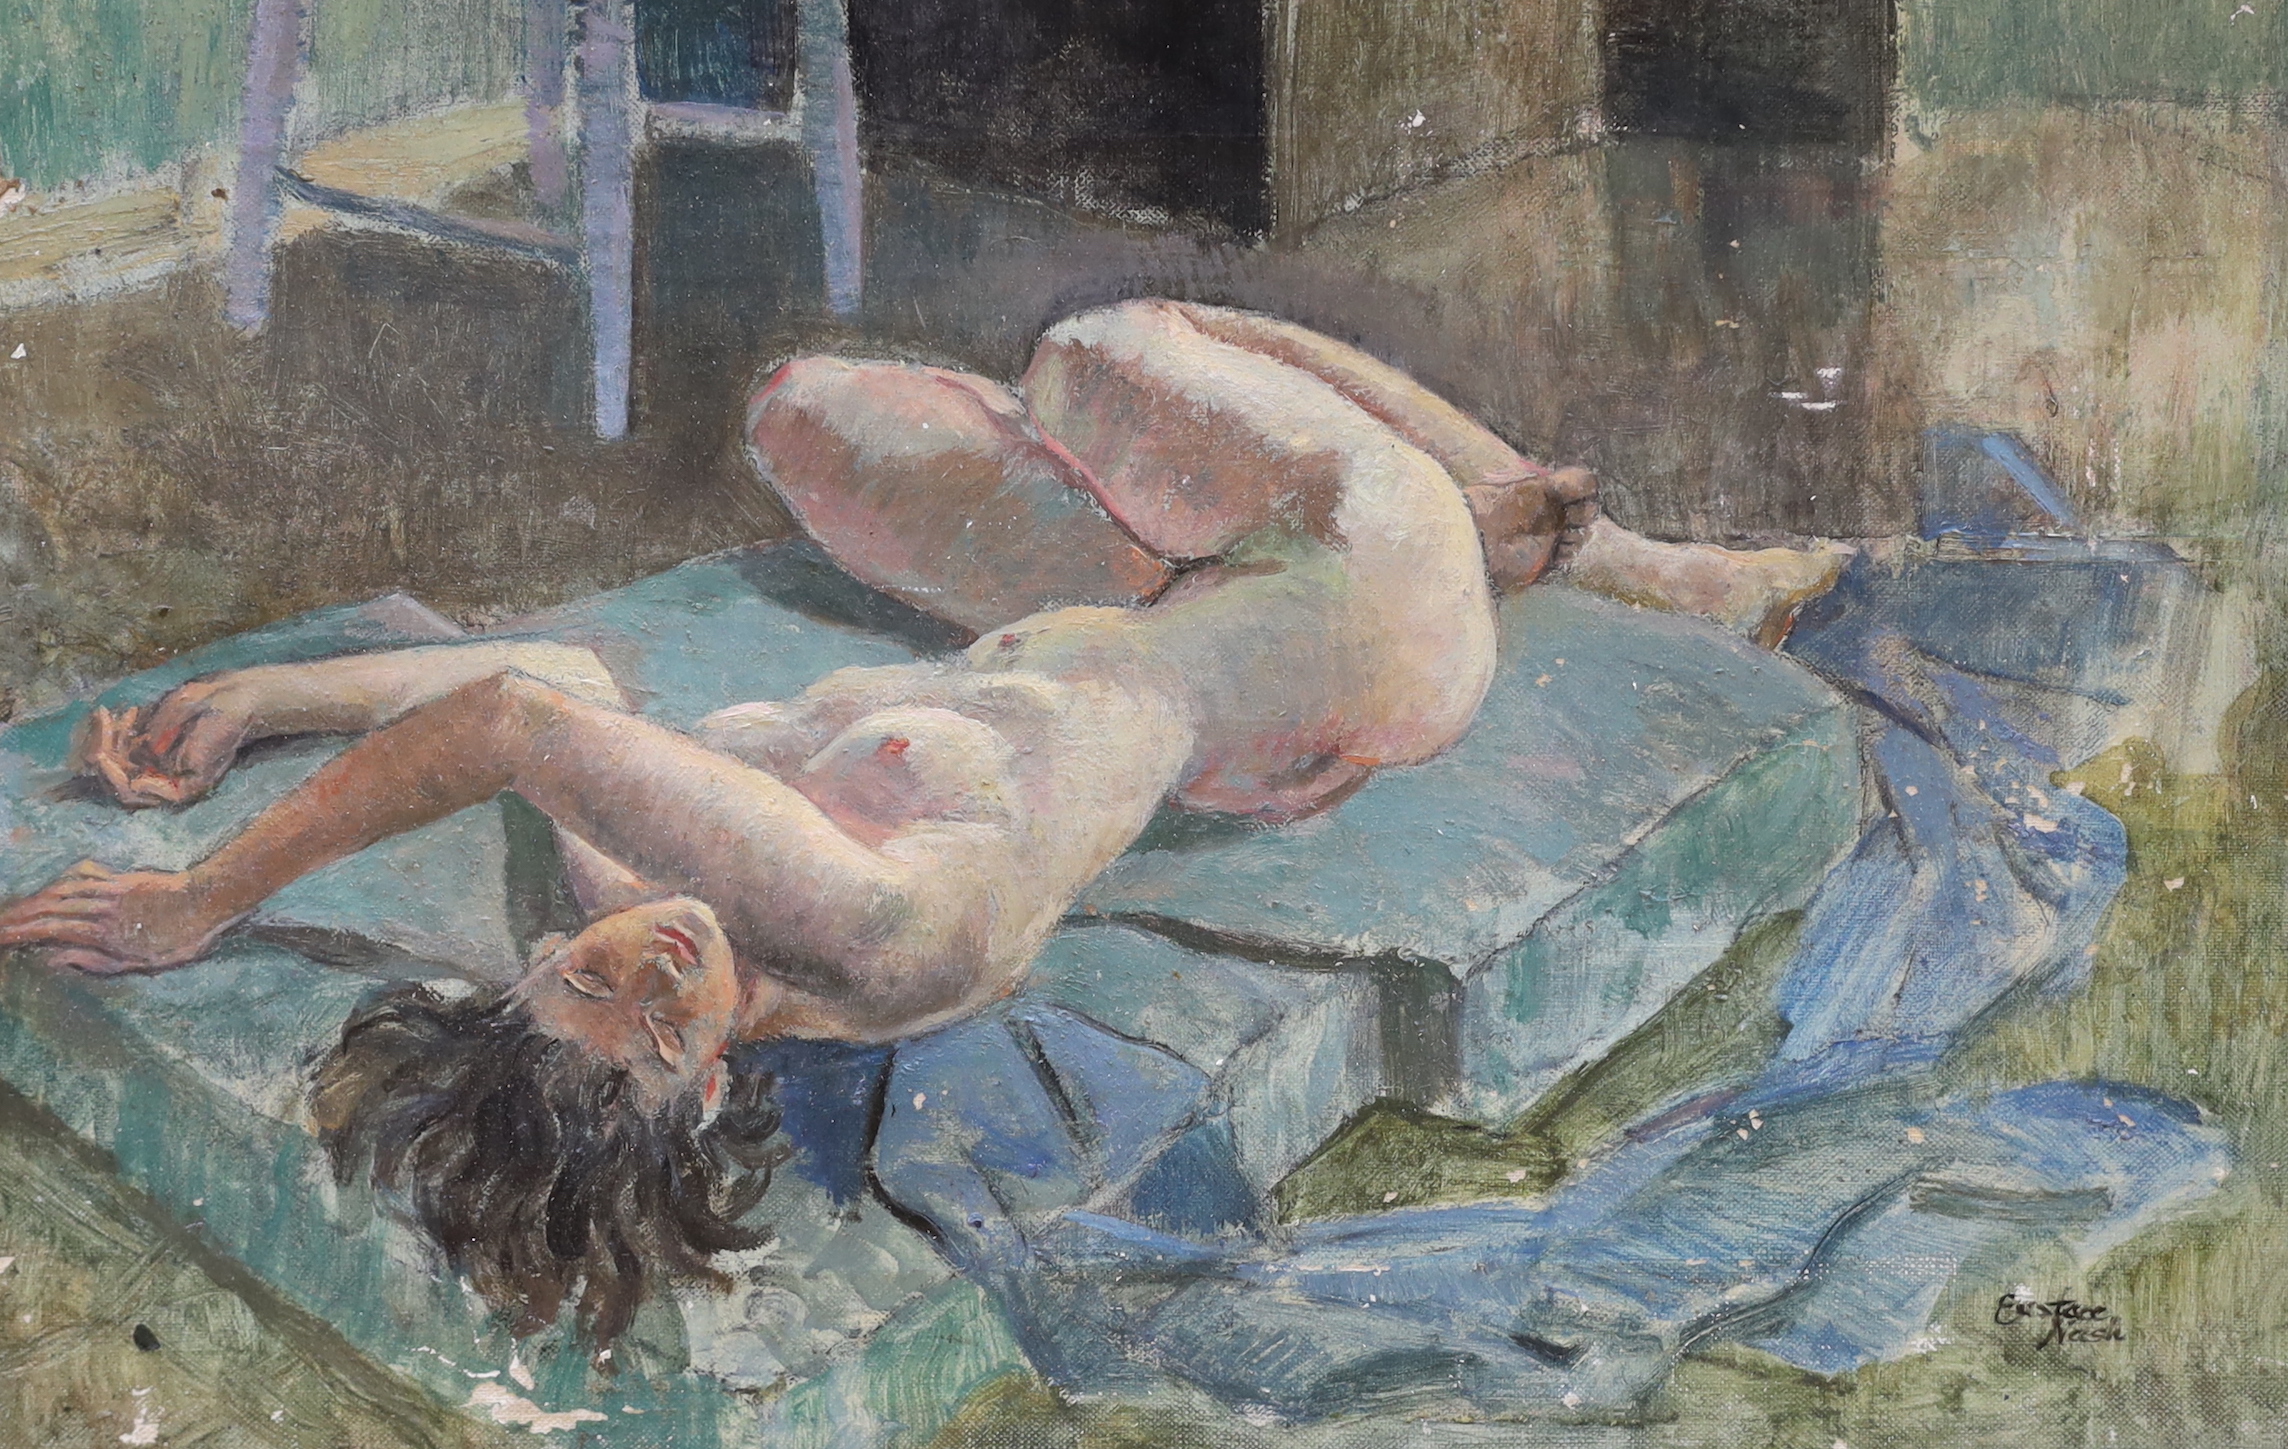 Eustace Pain Elliott Nash (1886-1969), oil on canvas, Recumbent nude, signed with label verso, 30 x 46cm